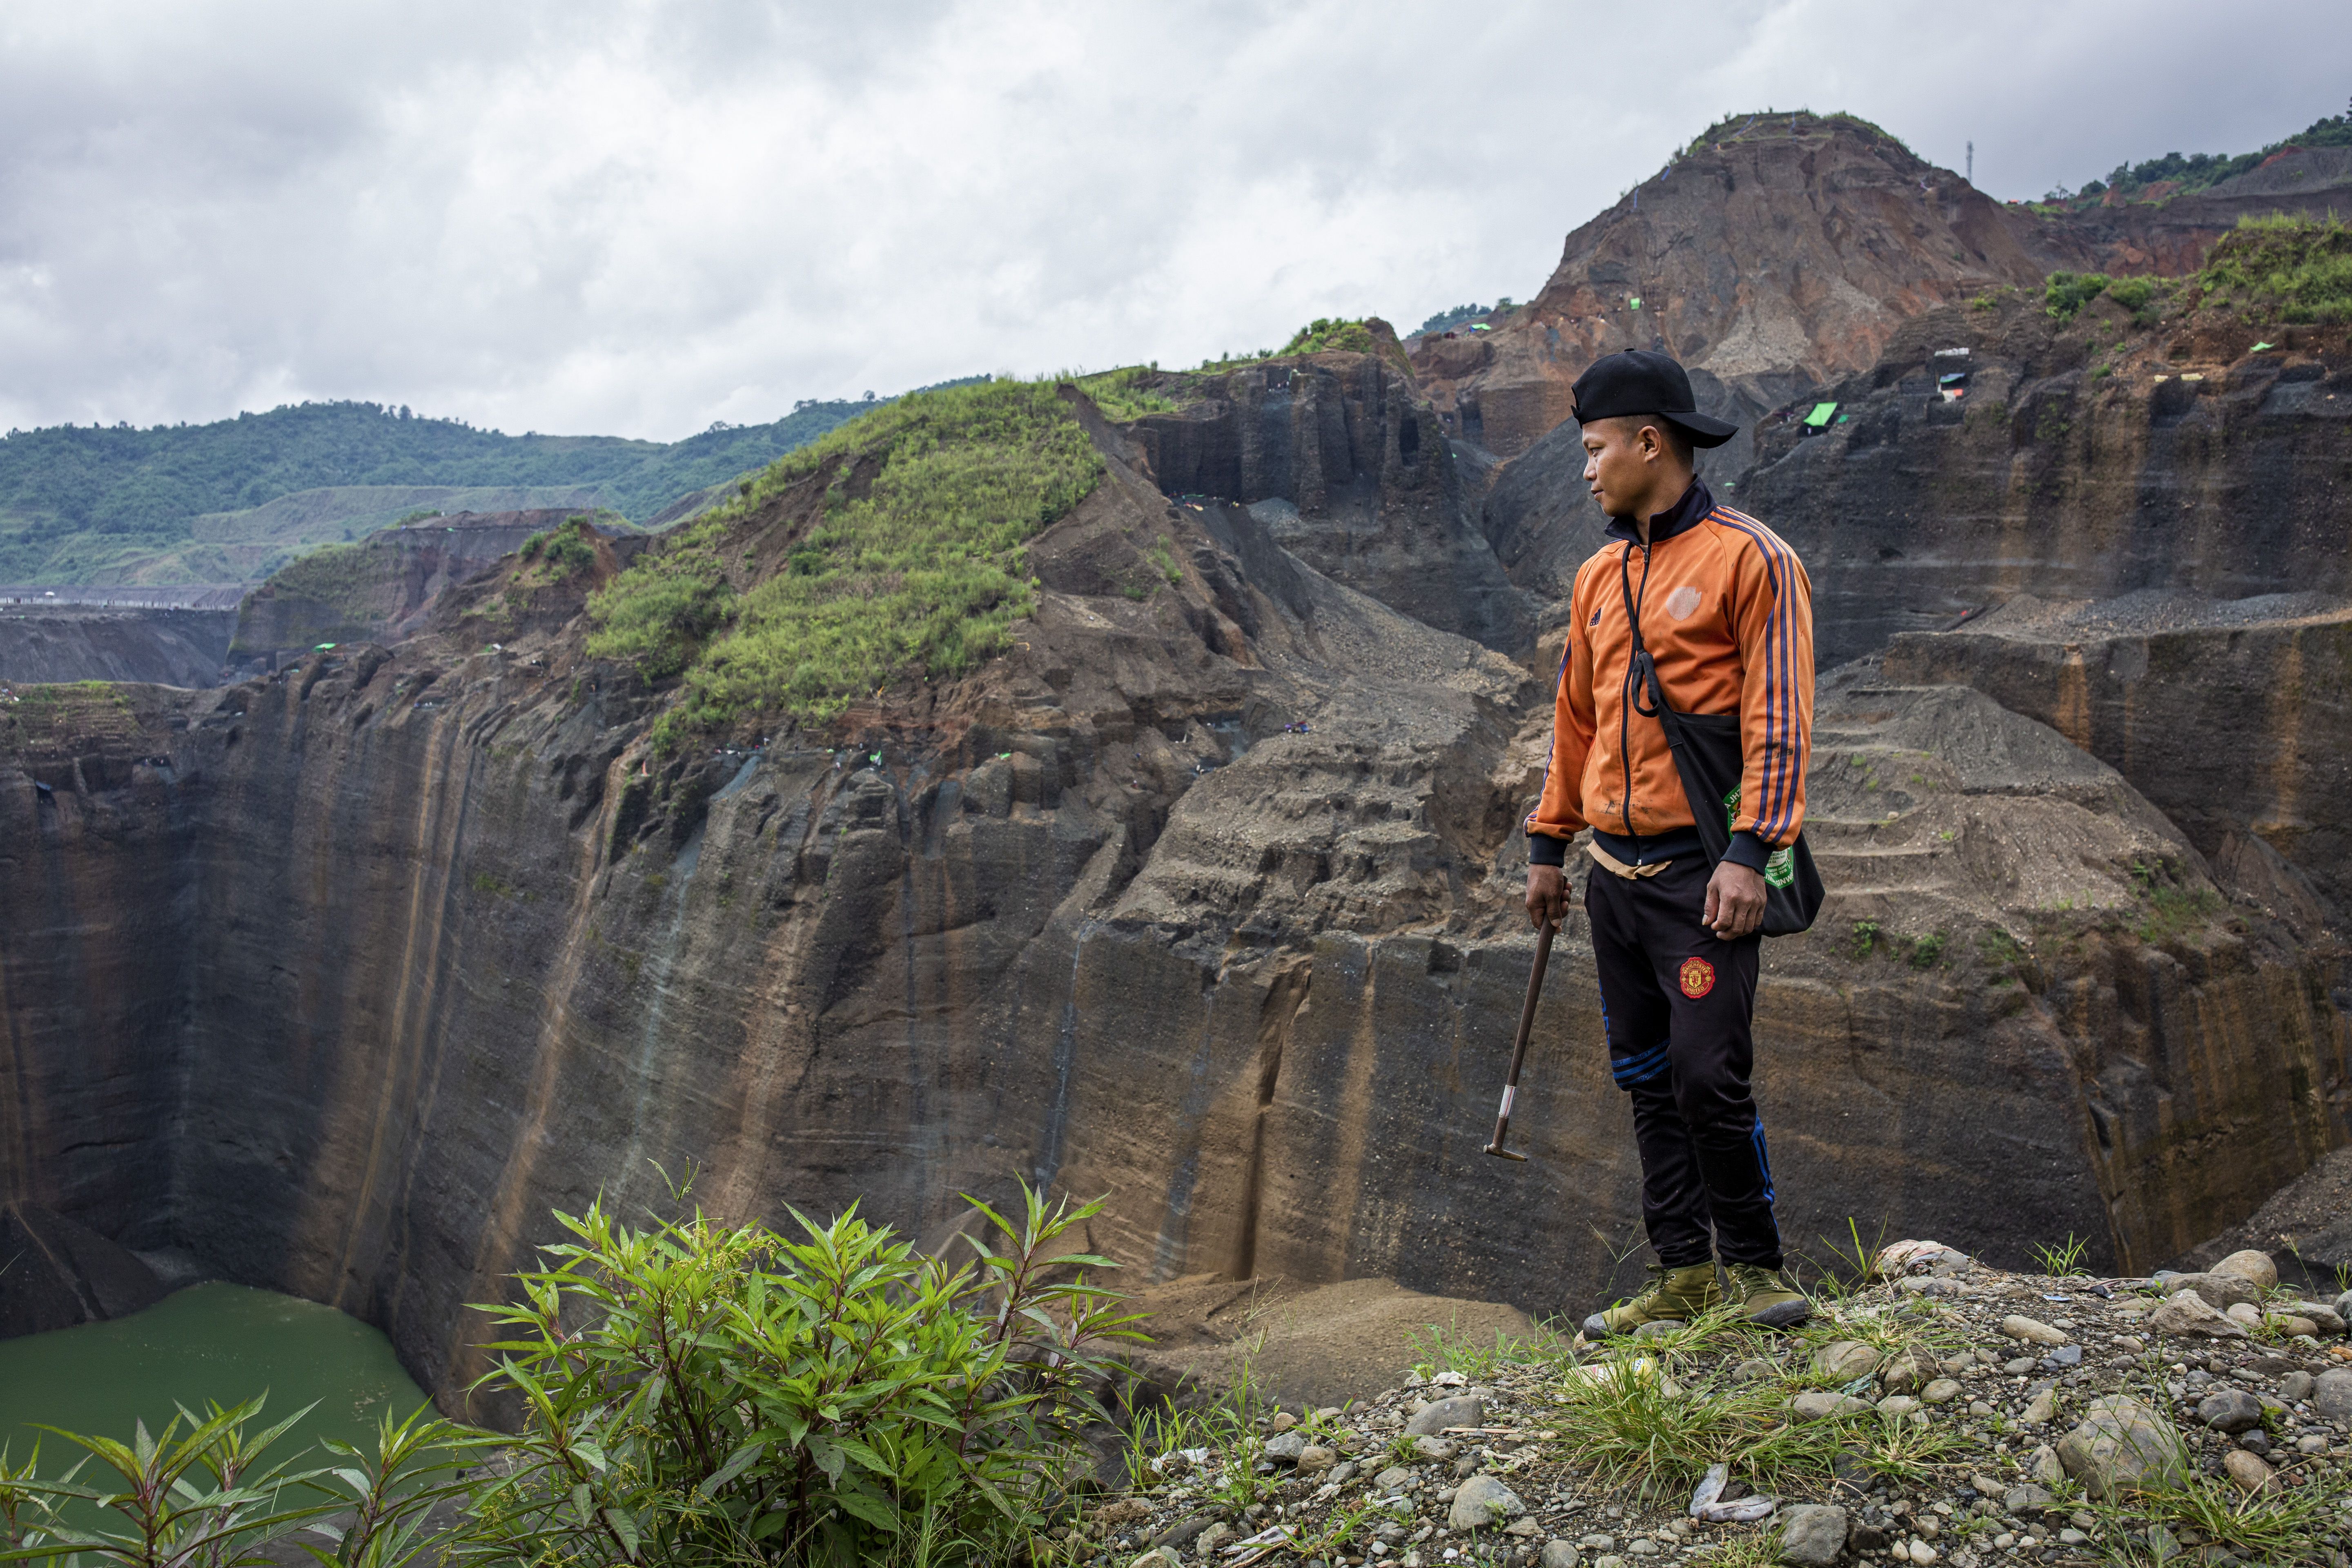 Gum Jat, 31, looks over a jade mining site in Hpakant, Kachin State, where he has worked as a freelance miner for eight years. Image by Hkun Lat/Frontier. Myanmar, 2020.